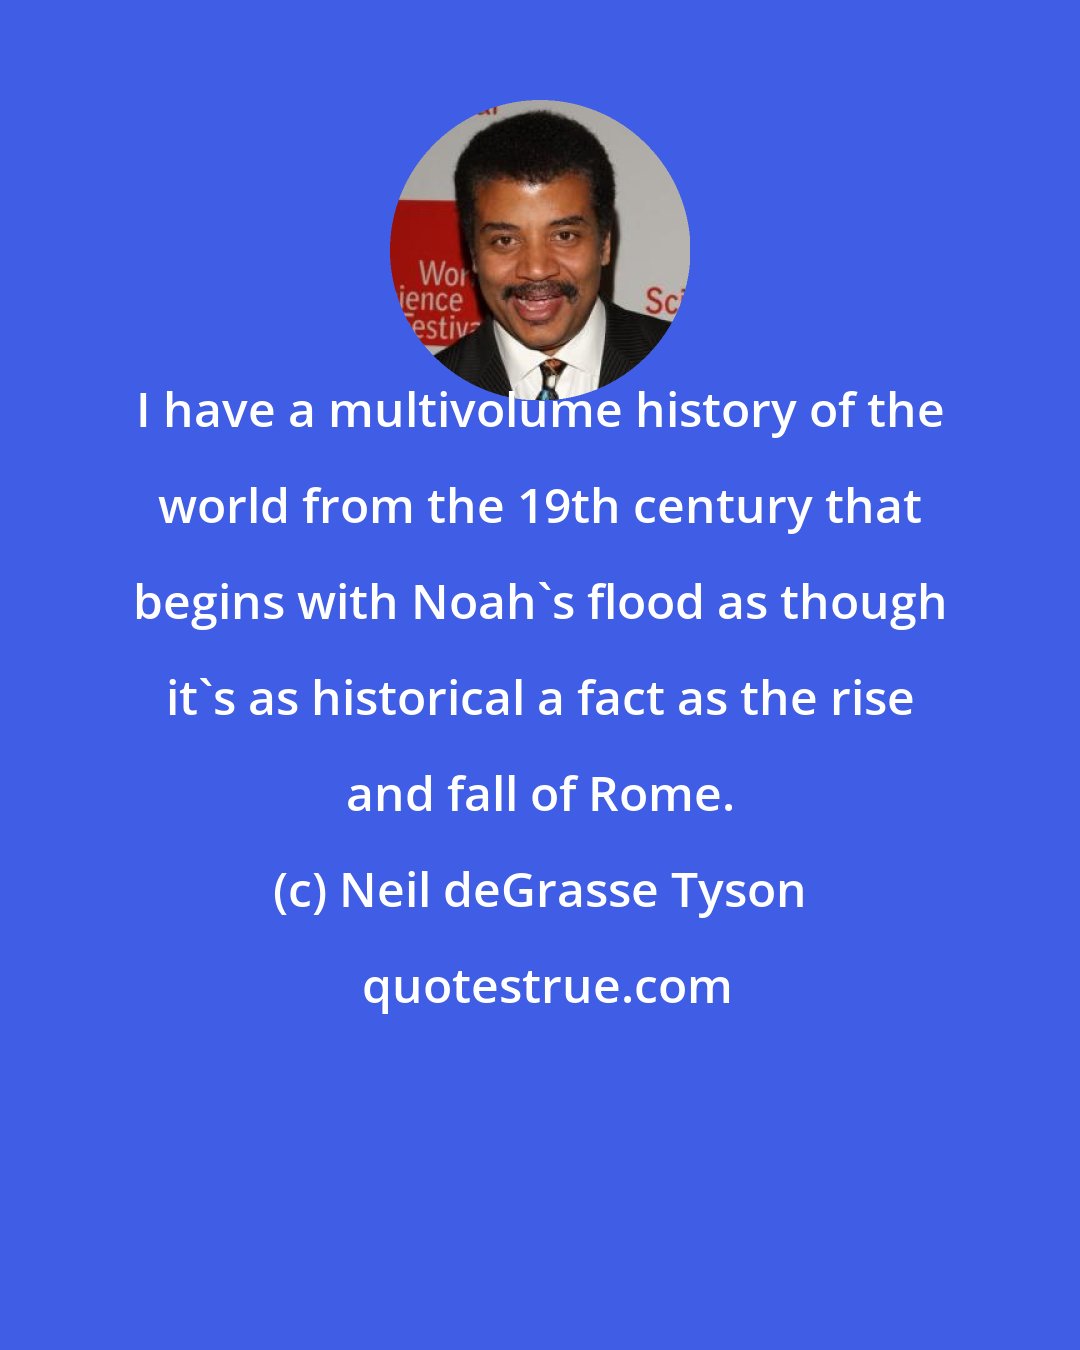 Neil deGrasse Tyson: I have a multivolume history of the world from the 19th century that begins with Noah's flood as though it's as historical a fact as the rise and fall of Rome.